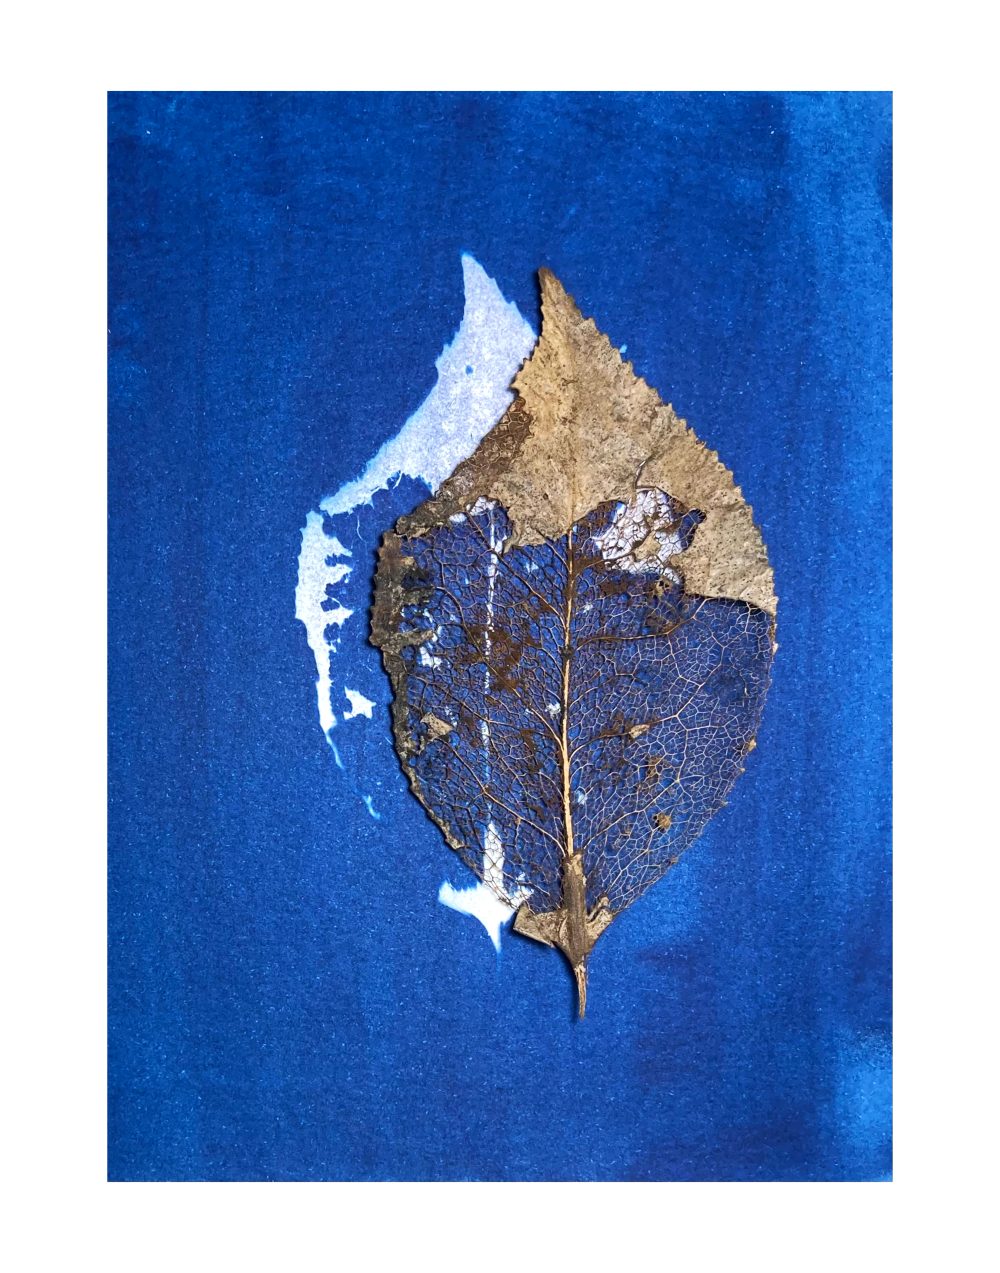 A brown leaf in the process of decomposing placed on a deep blue background with a white impression of the same leaf.